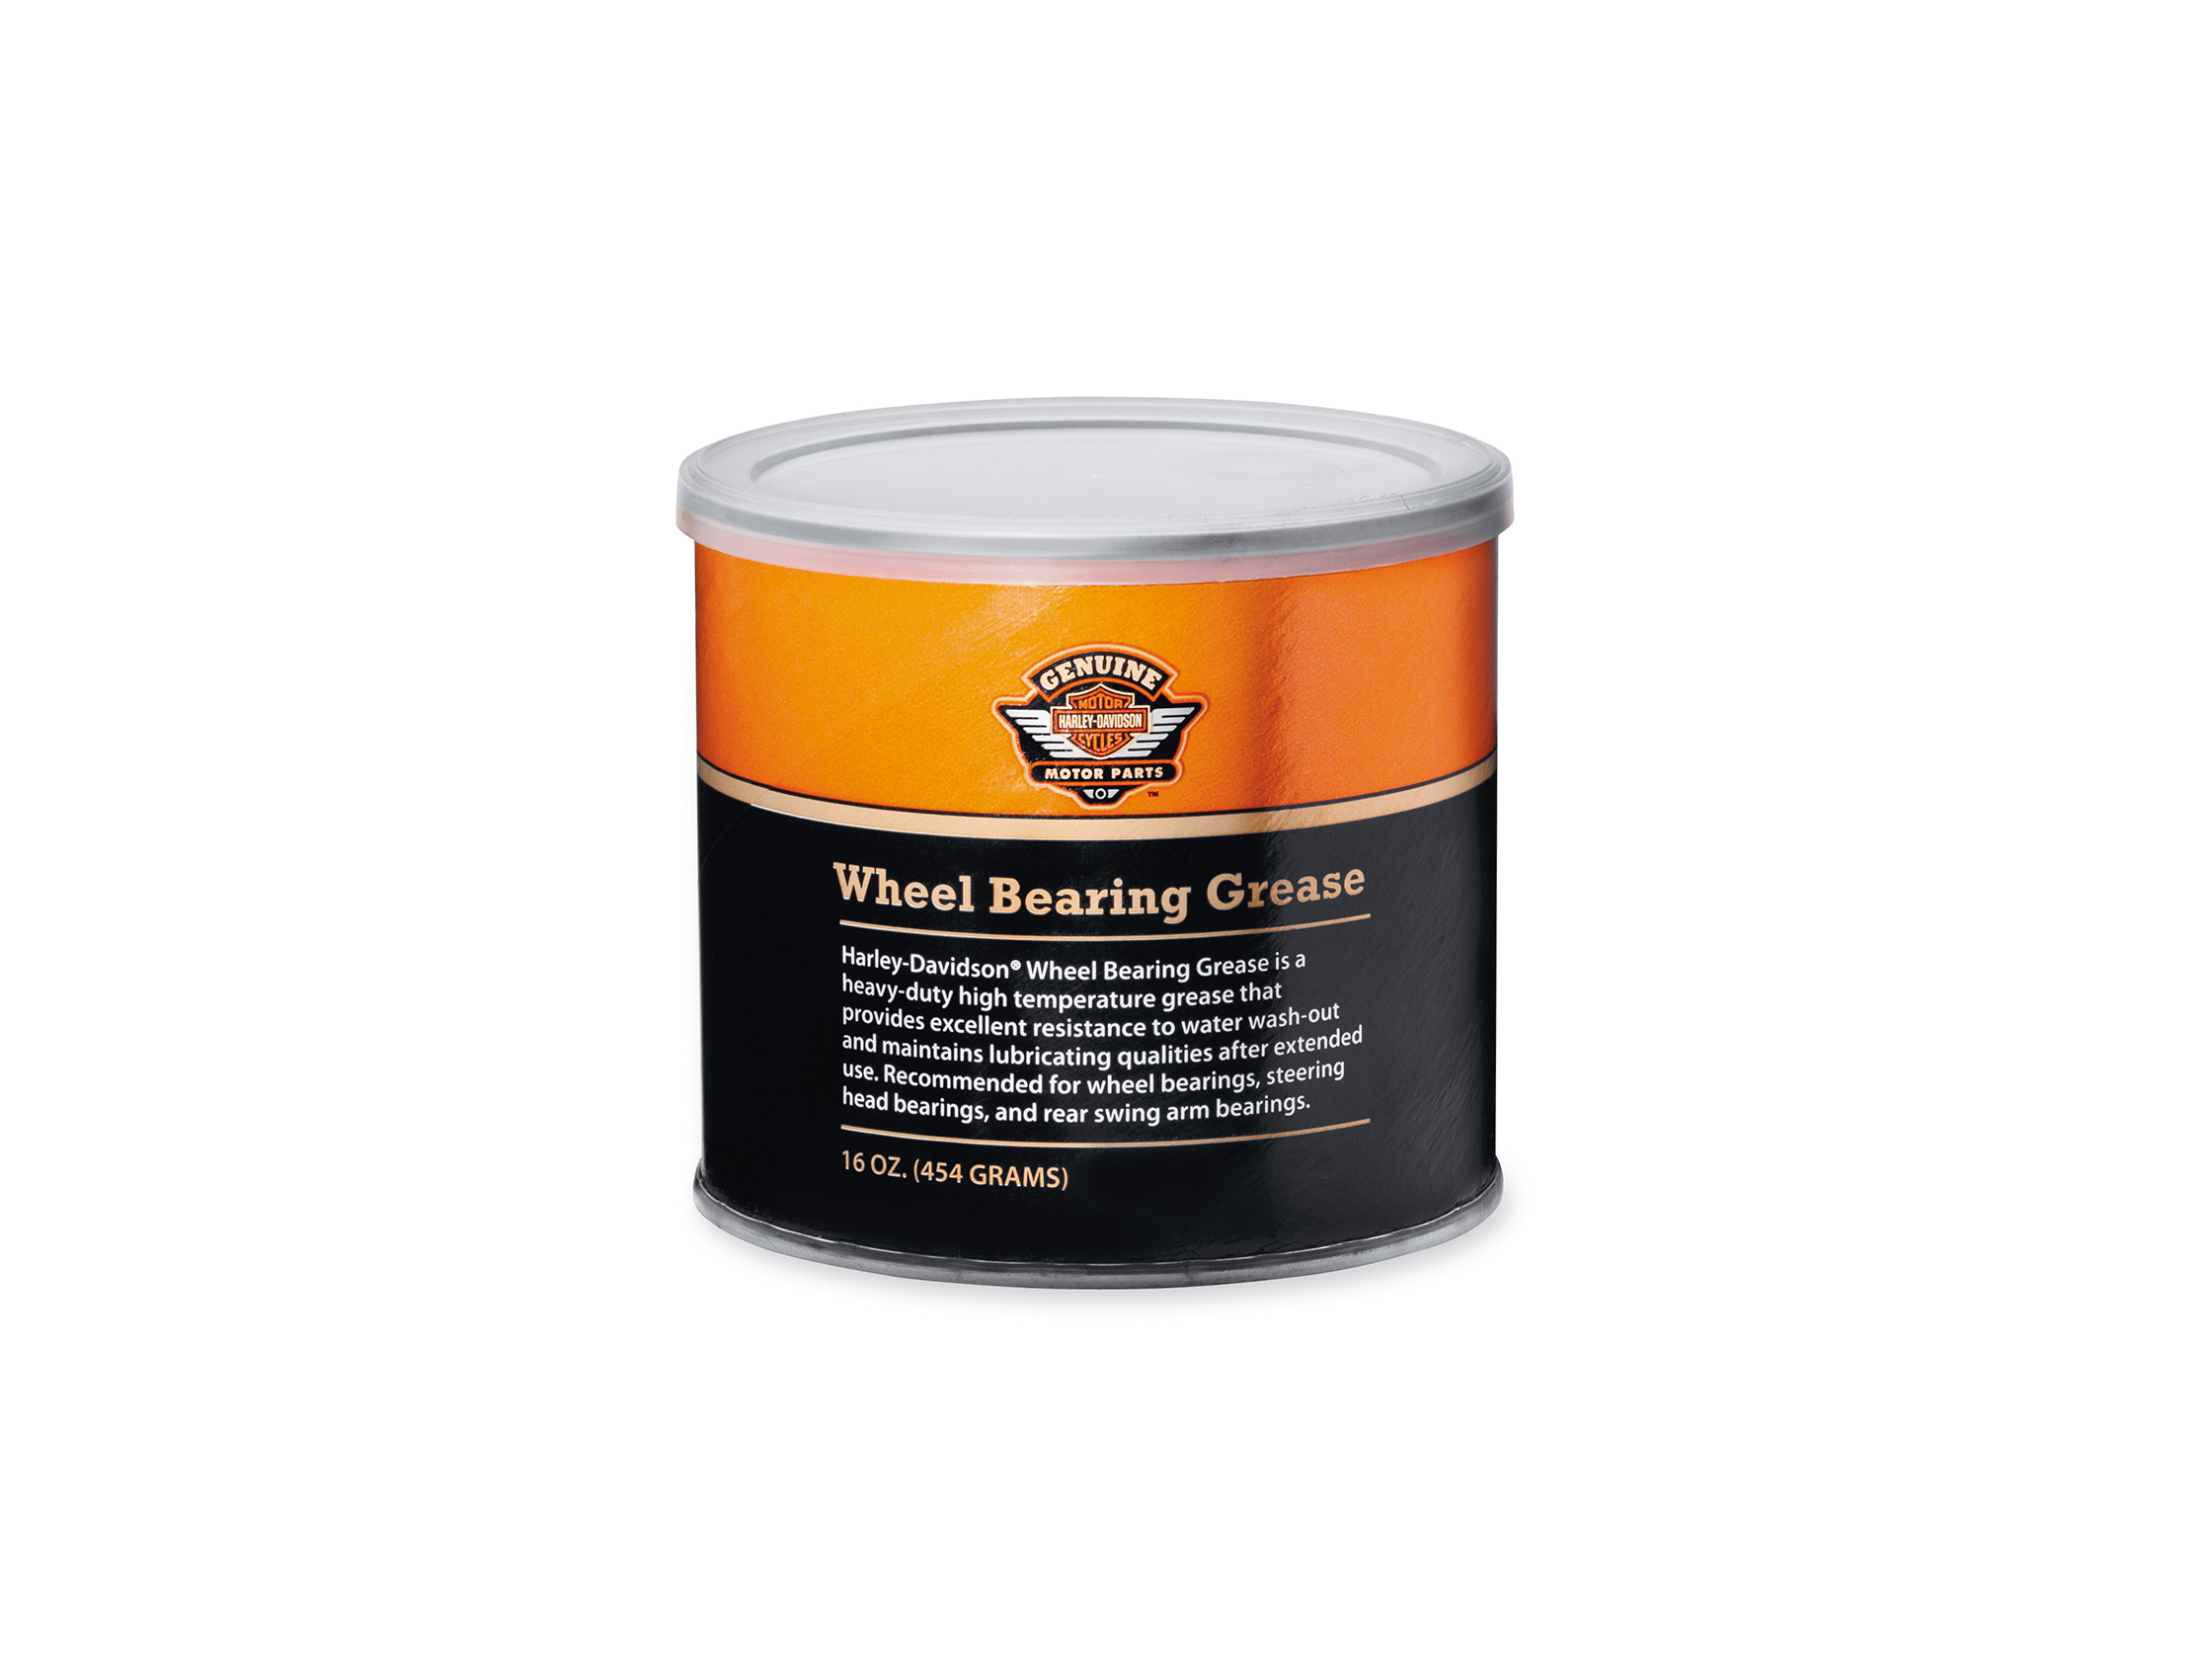 Wheel Bearing Grease - 1 lb Can 99855-89 / Oil & Lube / Safety & Warranty /  Parts & Accessories / - House-of-Flames Harley-Davidson